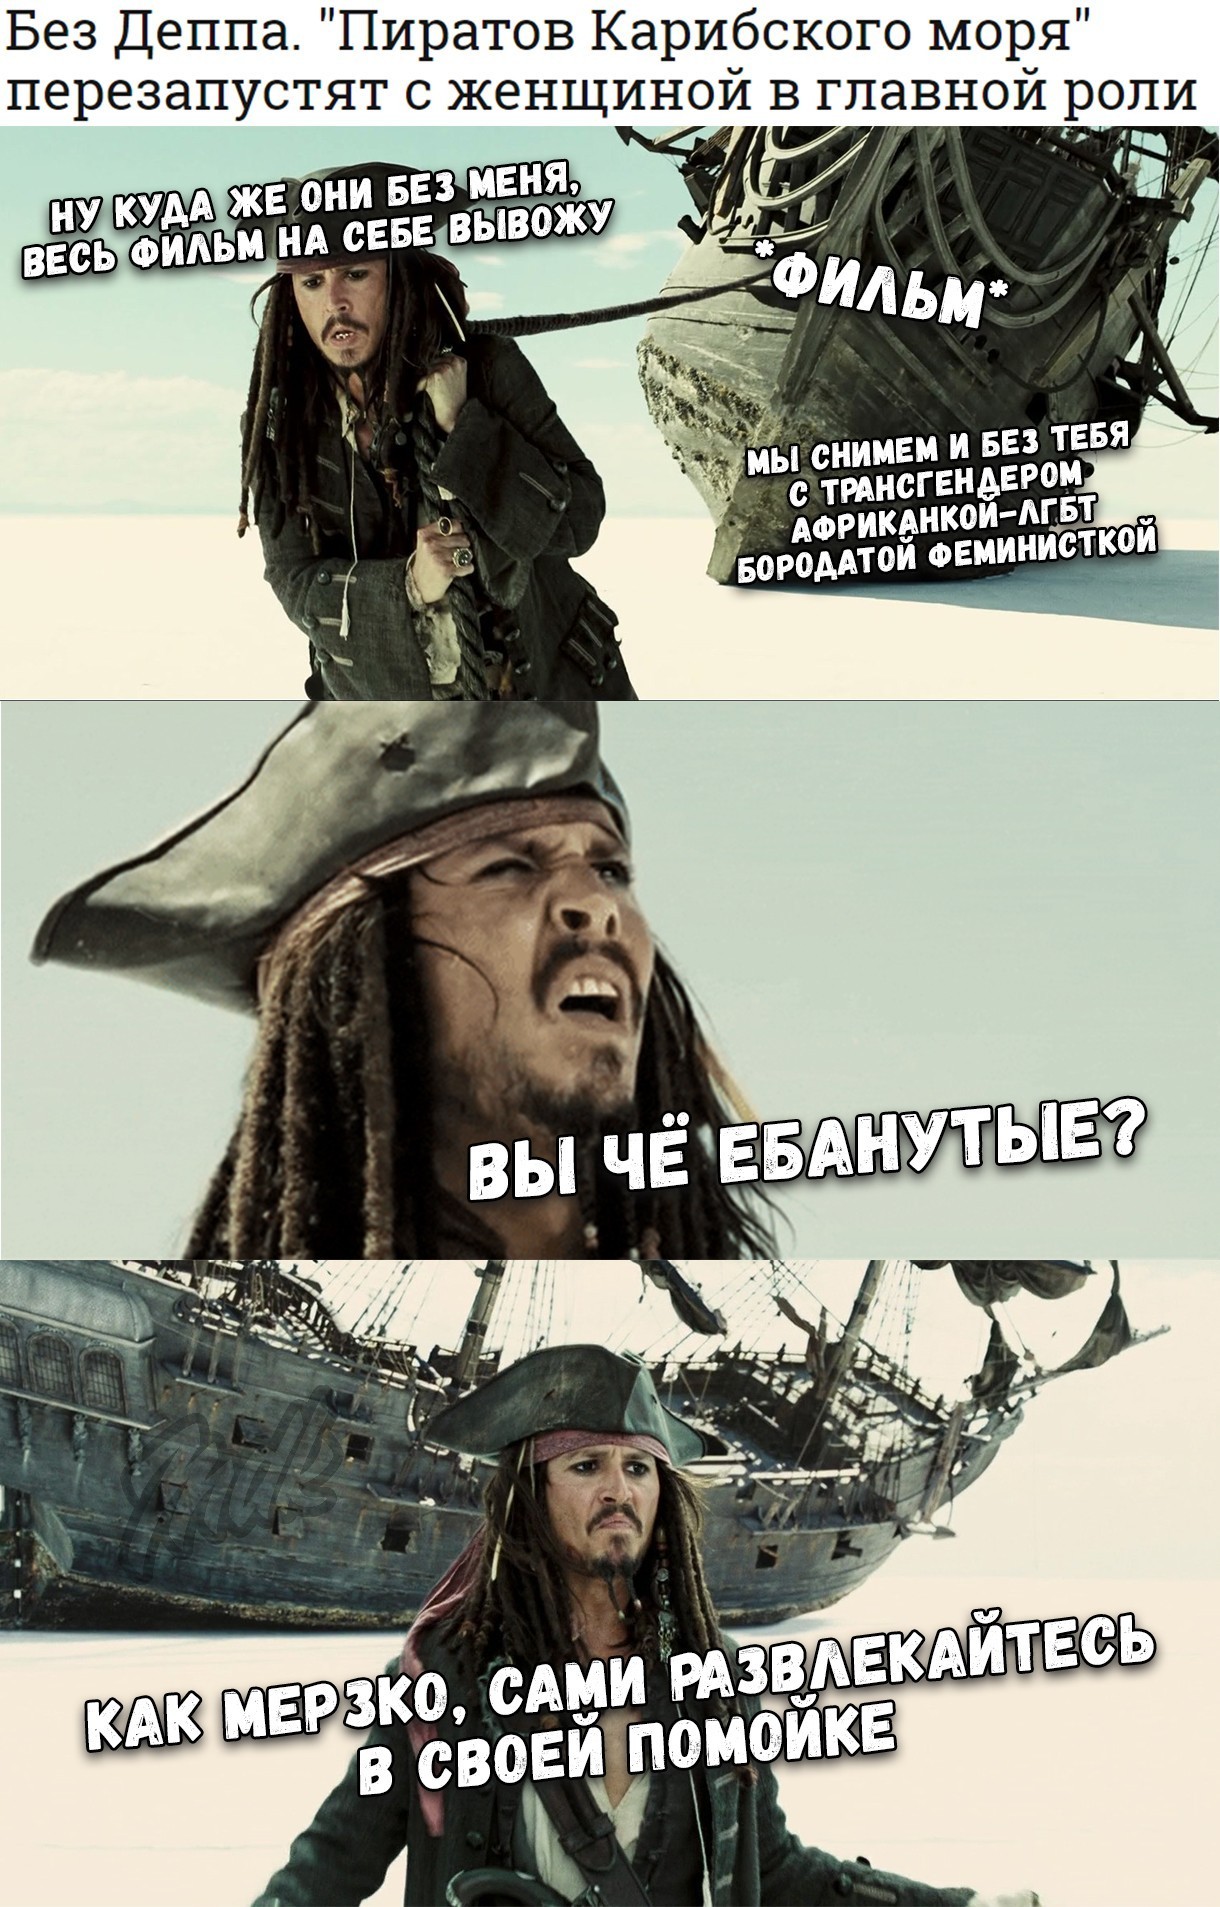 It's a pity - Pirates of the Caribbean, Johnny Depp, Movies, Mat